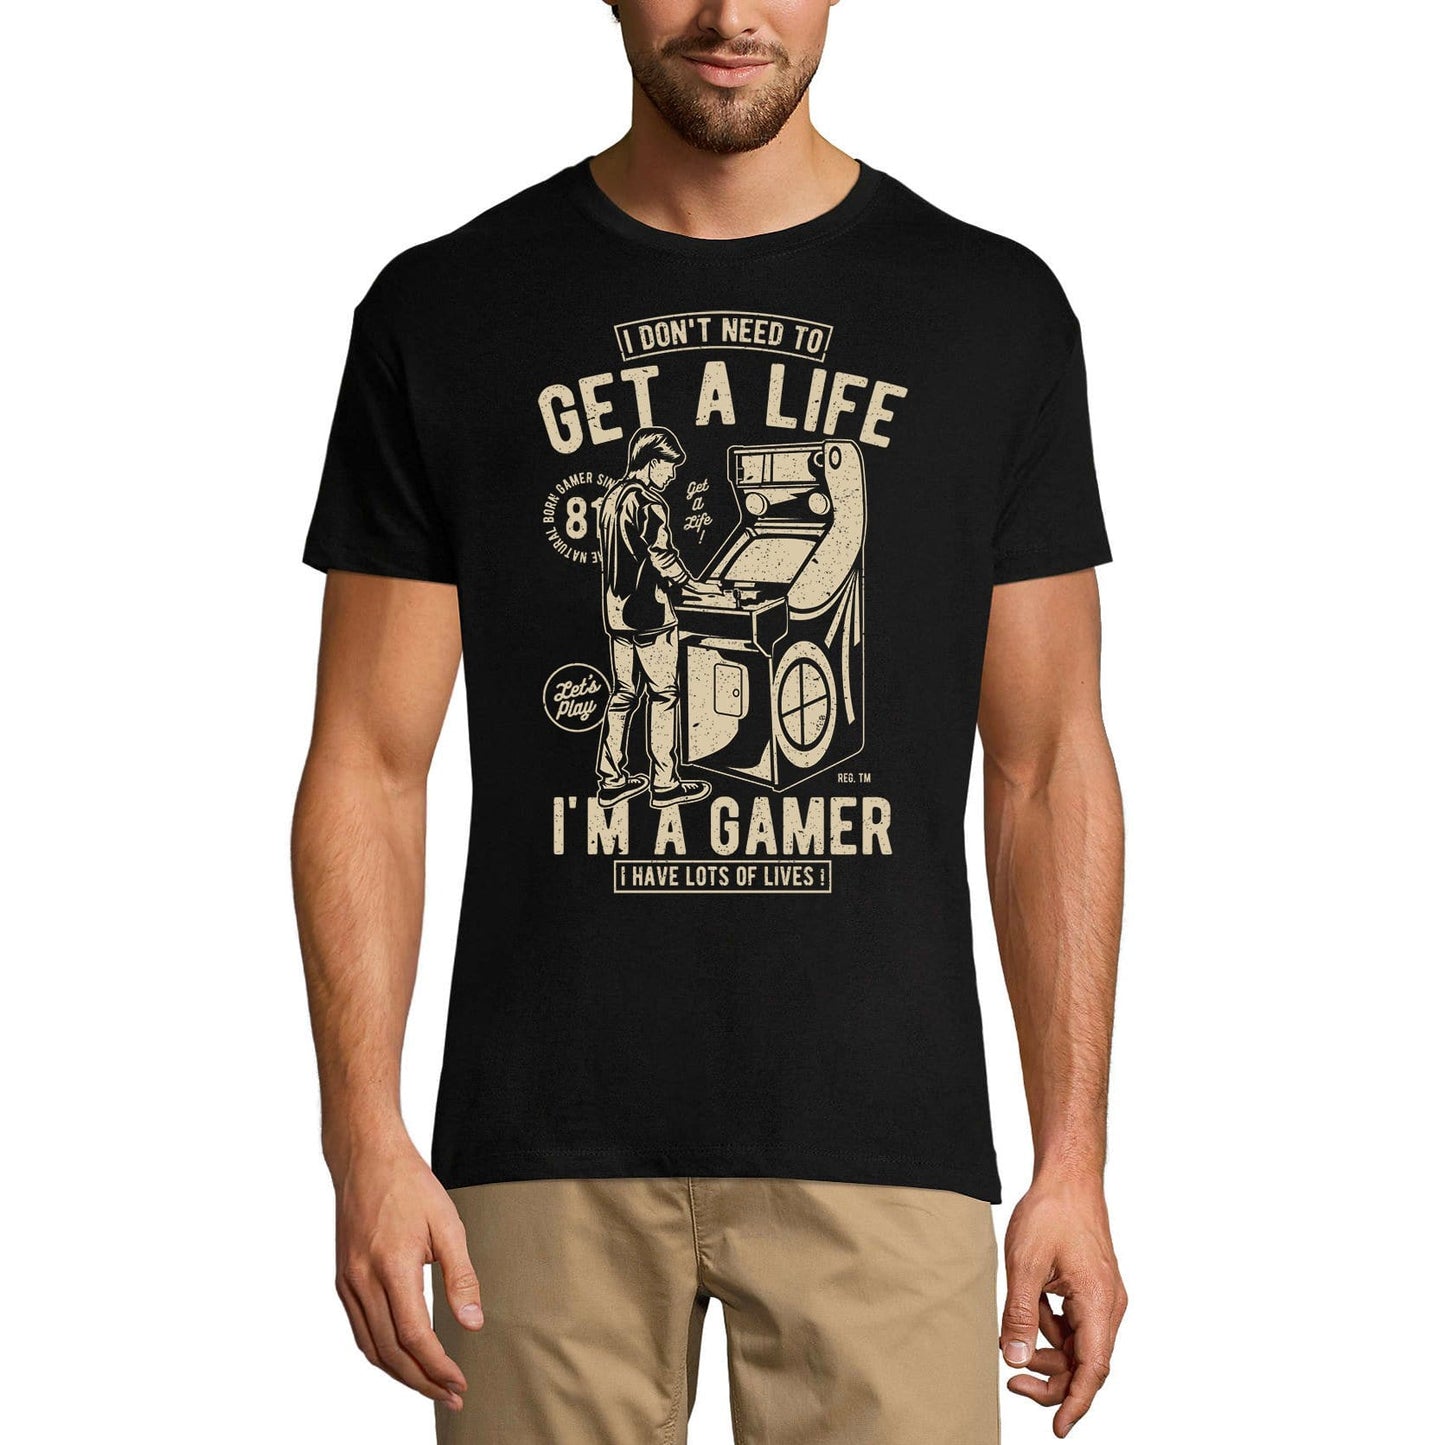 ULTRABASIC Men's Gaming T-Shirt I Don't Need To Get a Life I'm a Gamer - Funny Tee Shirt